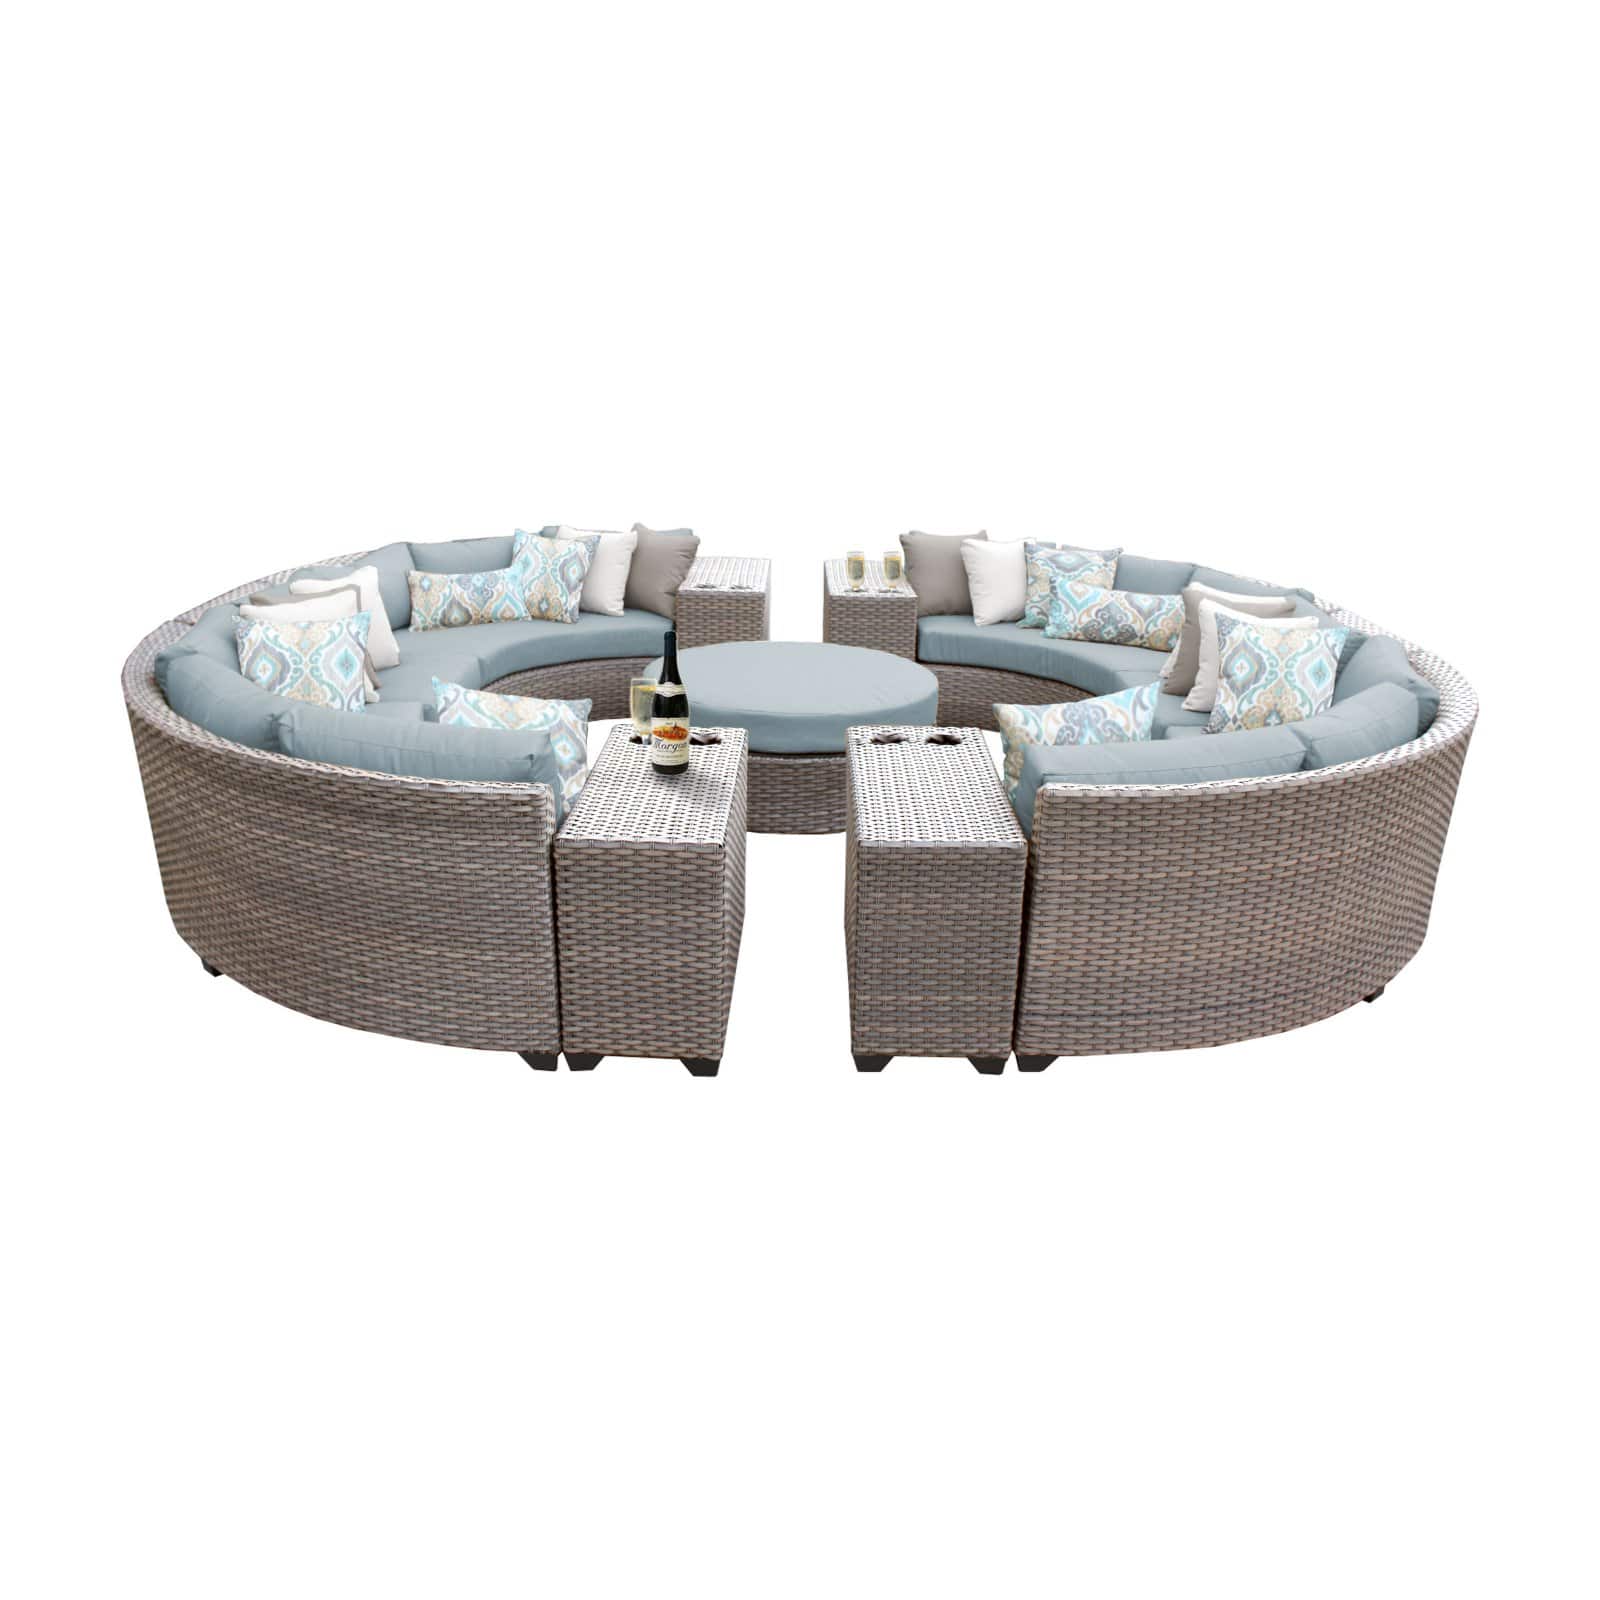 TK Classics Florence Wicker 11 Piece Patio Conversation Set with Coffee Table and 2 Sets of Cushion Covers - image 2 of 2